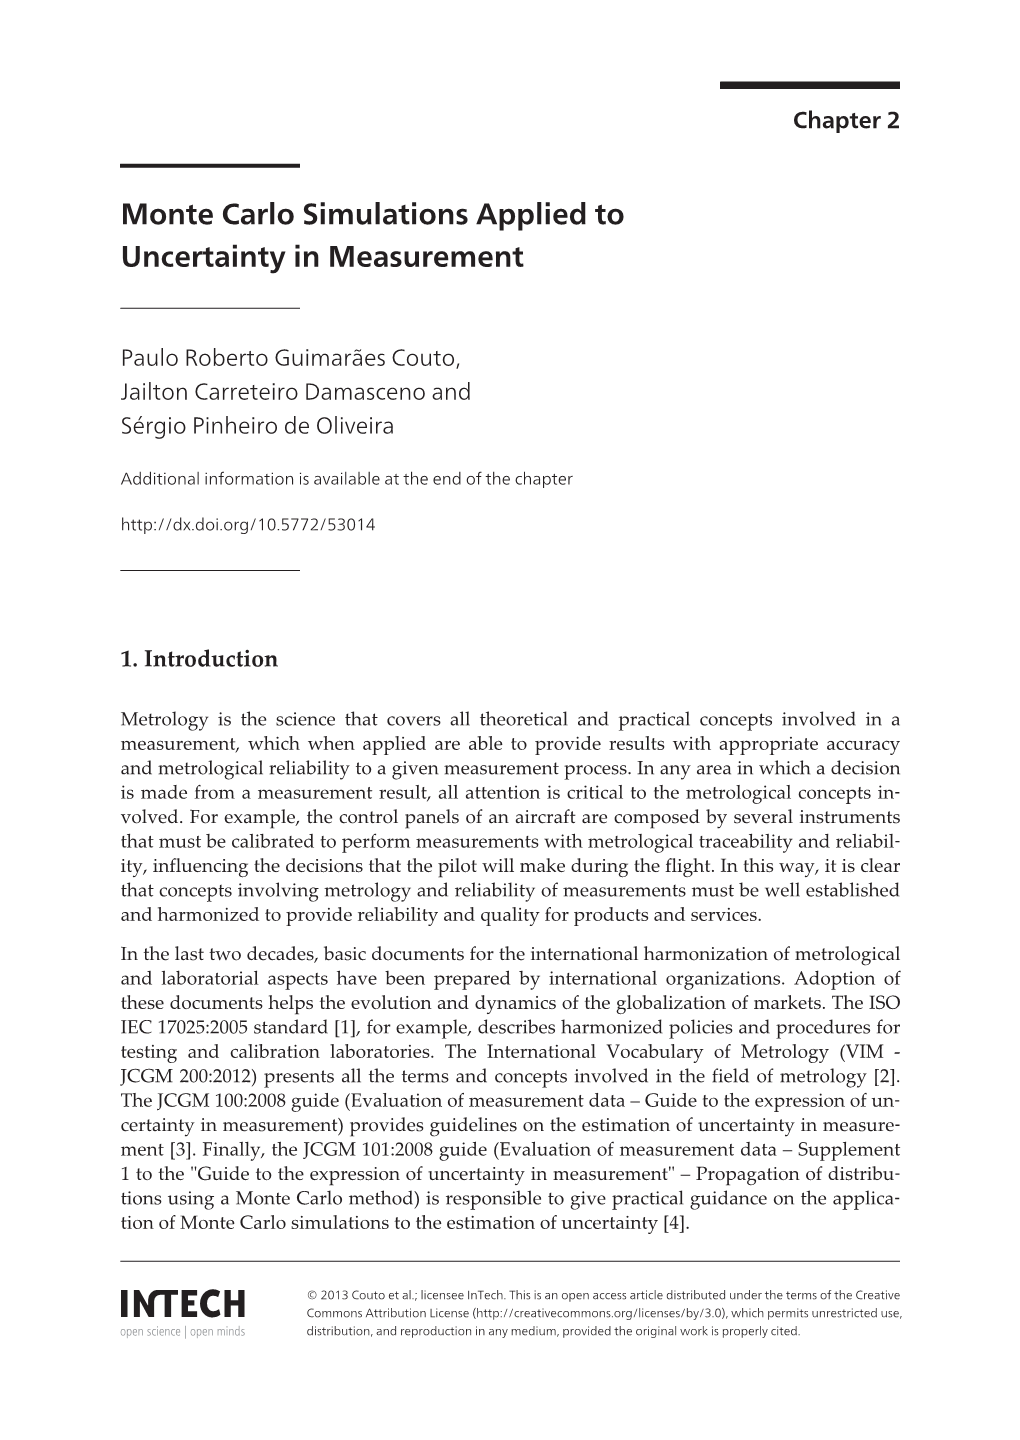 Monte Carlo Simulations Applied to Uncertainty in Measurement